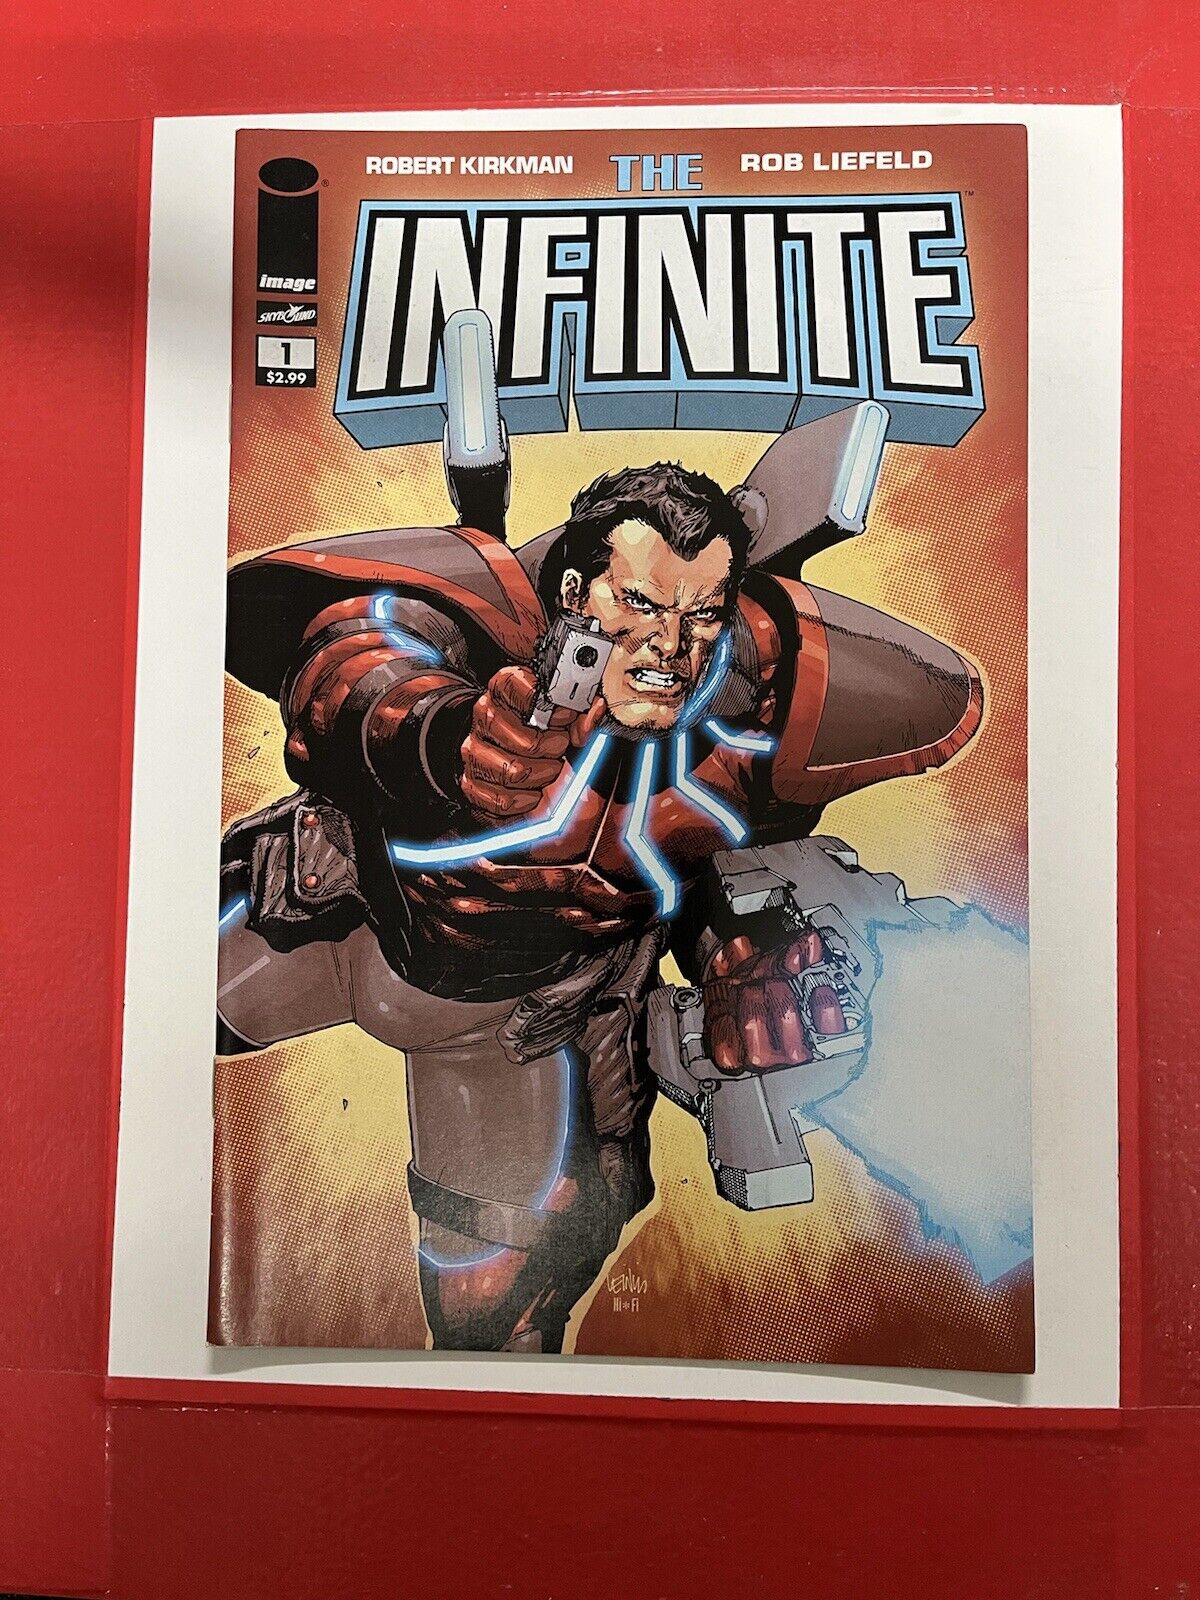 The Infinite #1 Image Comics Kirkman and Liefeld 2011 comic book | Combined Ship